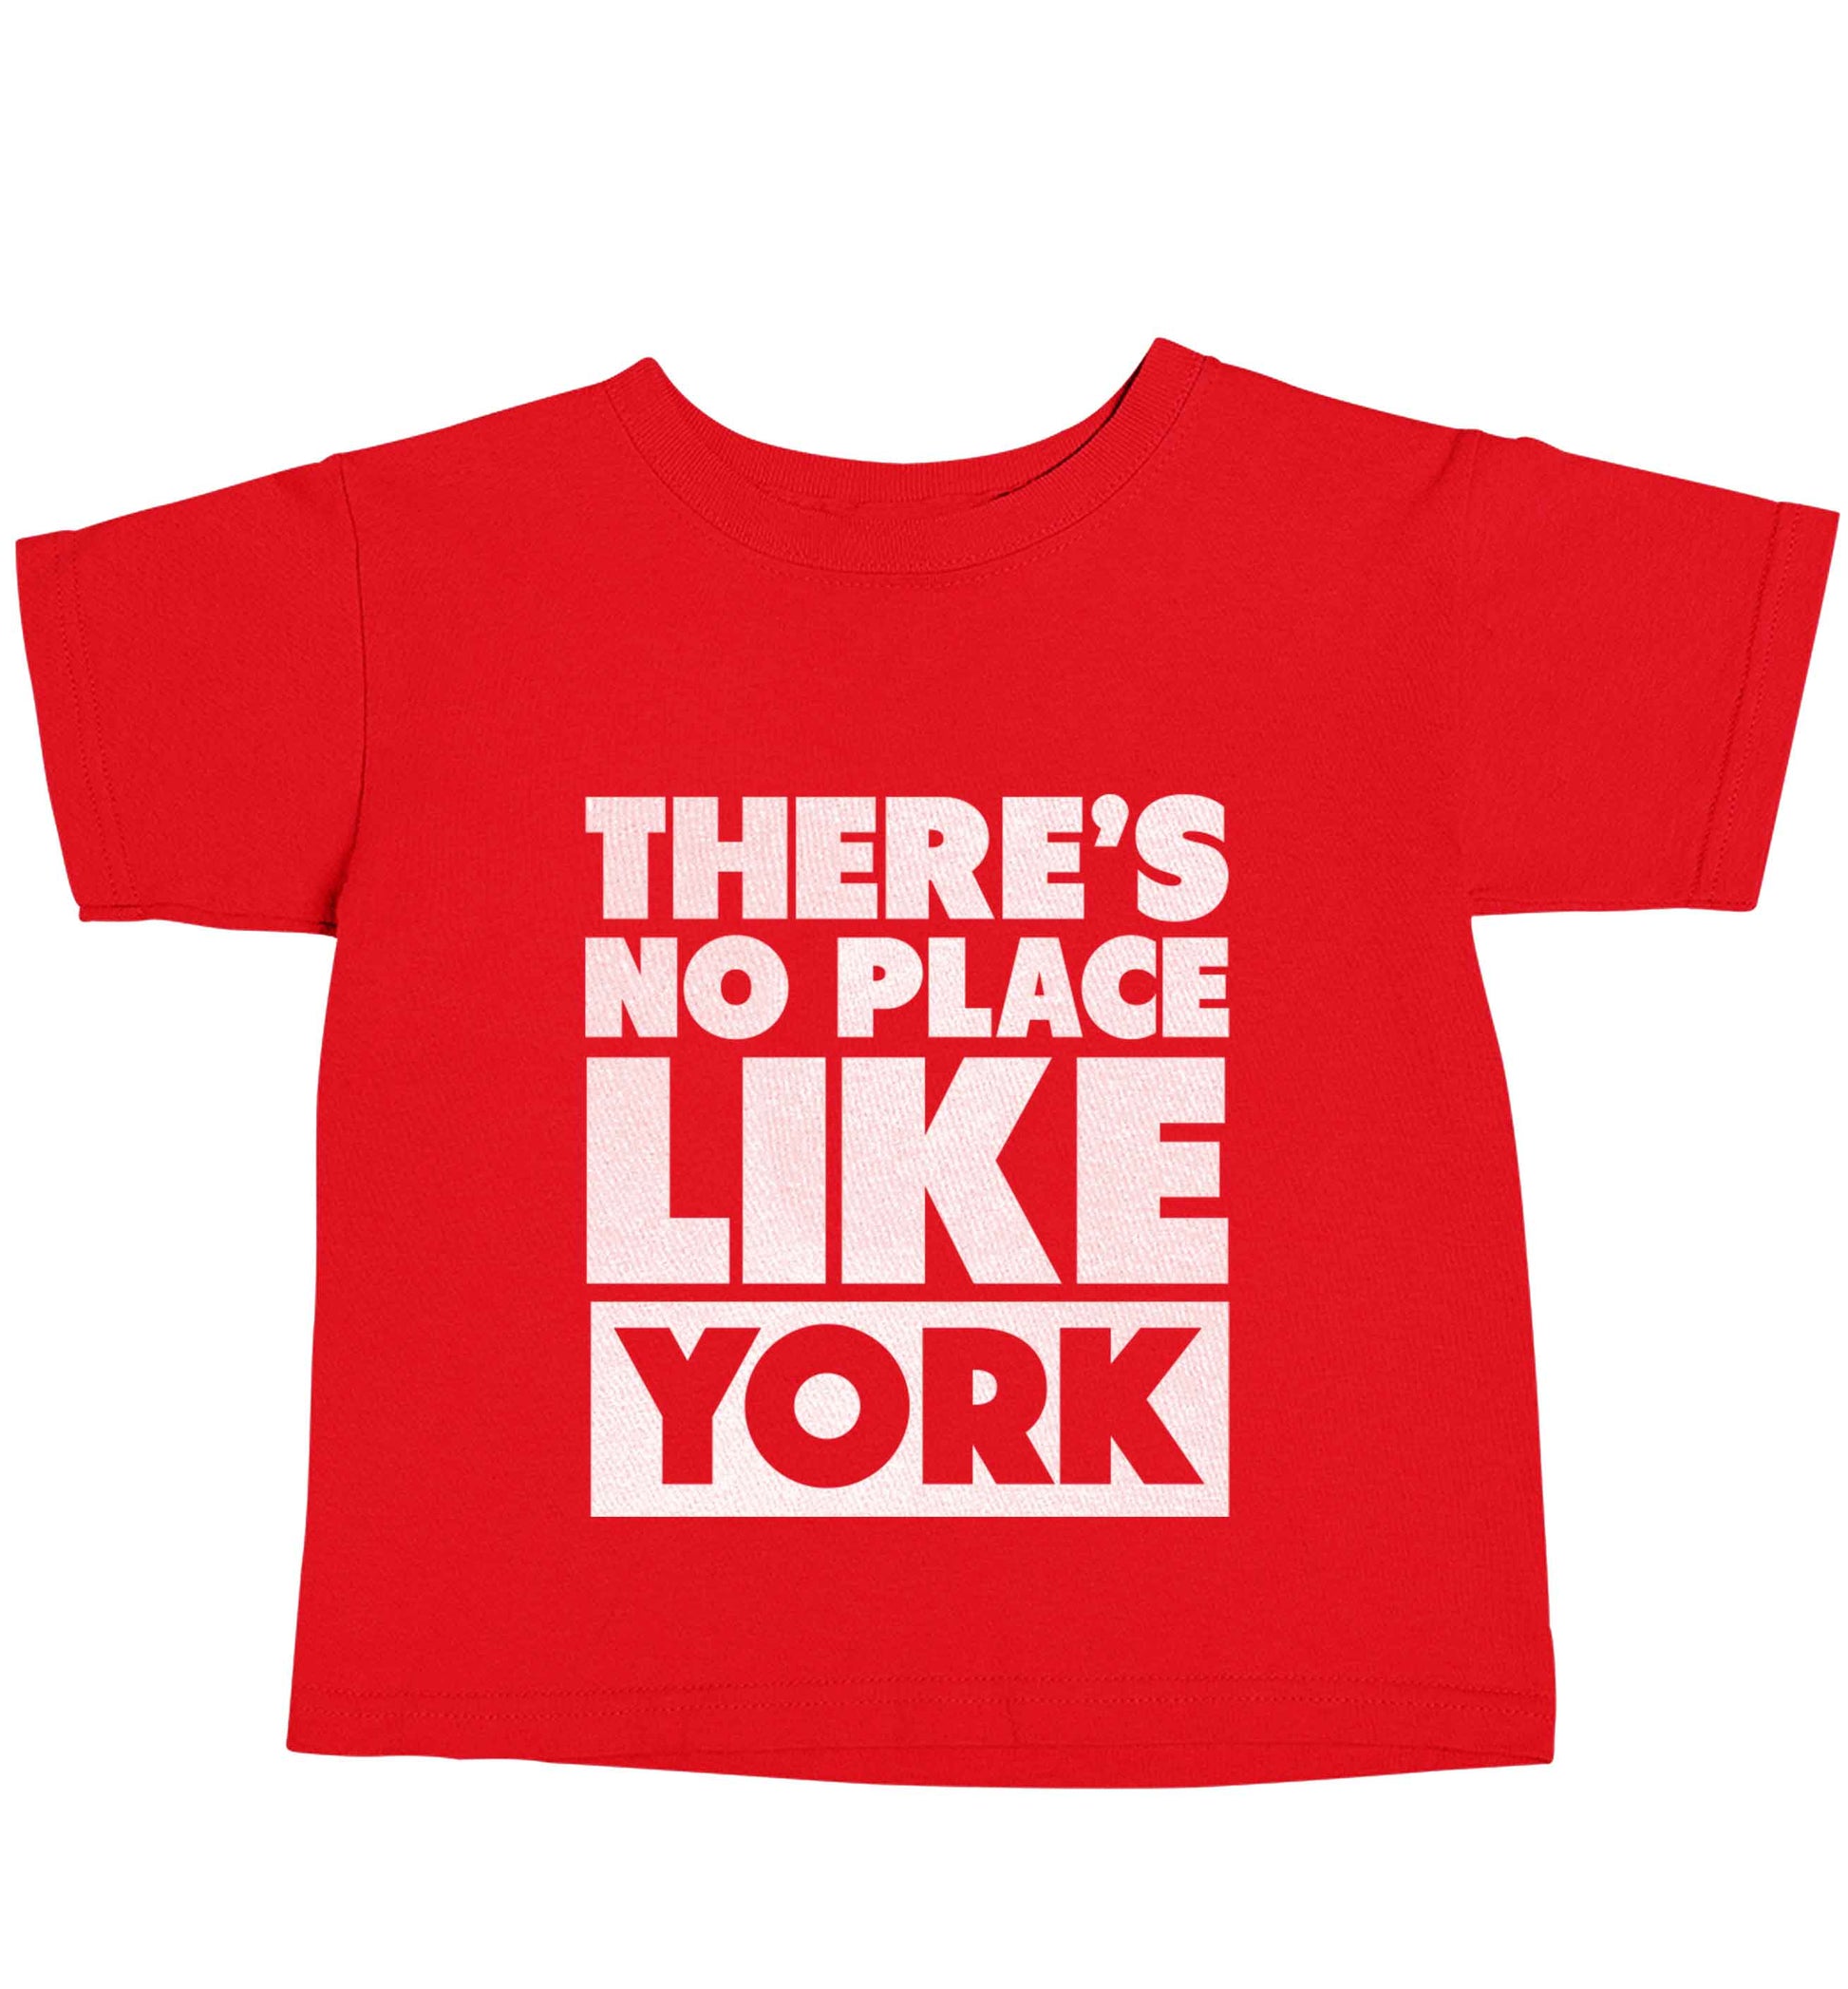 There's no place like york red baby toddler Tshirt 2 Years